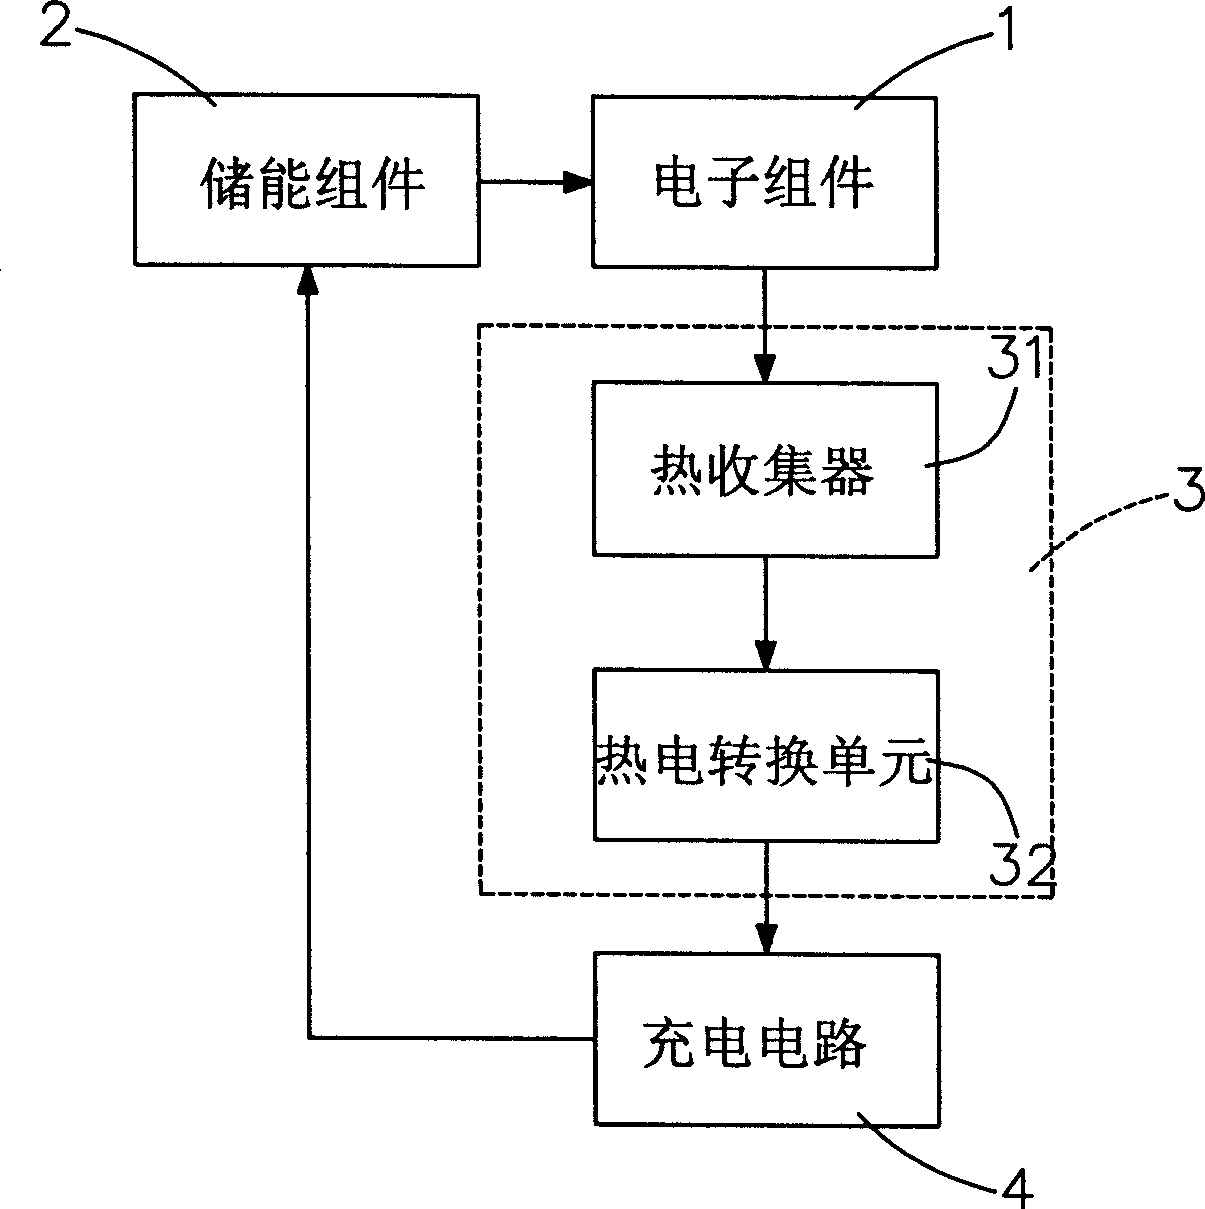 Self-supply electric energy method and system for portable electronic equipment